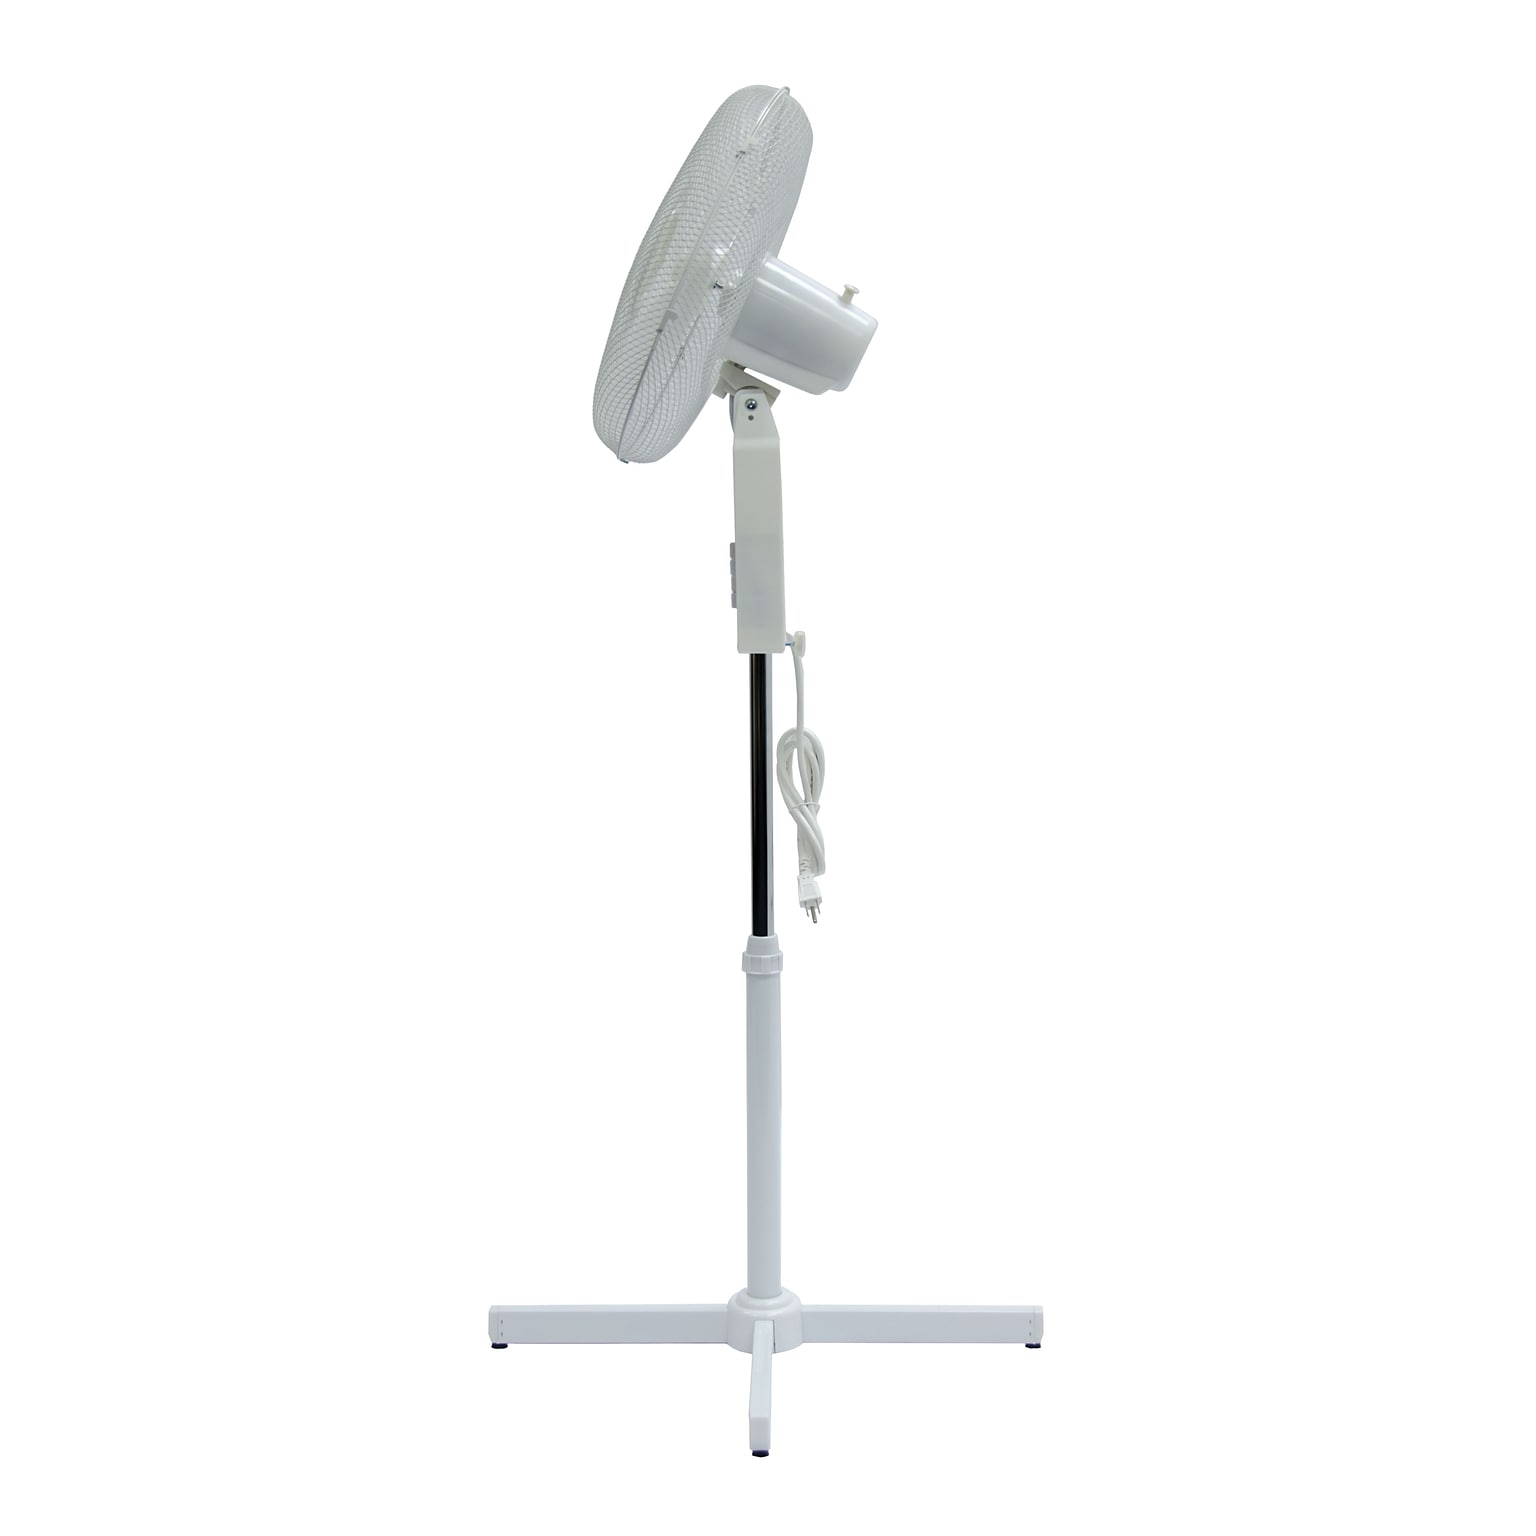 TPI Workstation 16 Oscillating Stand Fan, 3-Speed, White (OSF16)